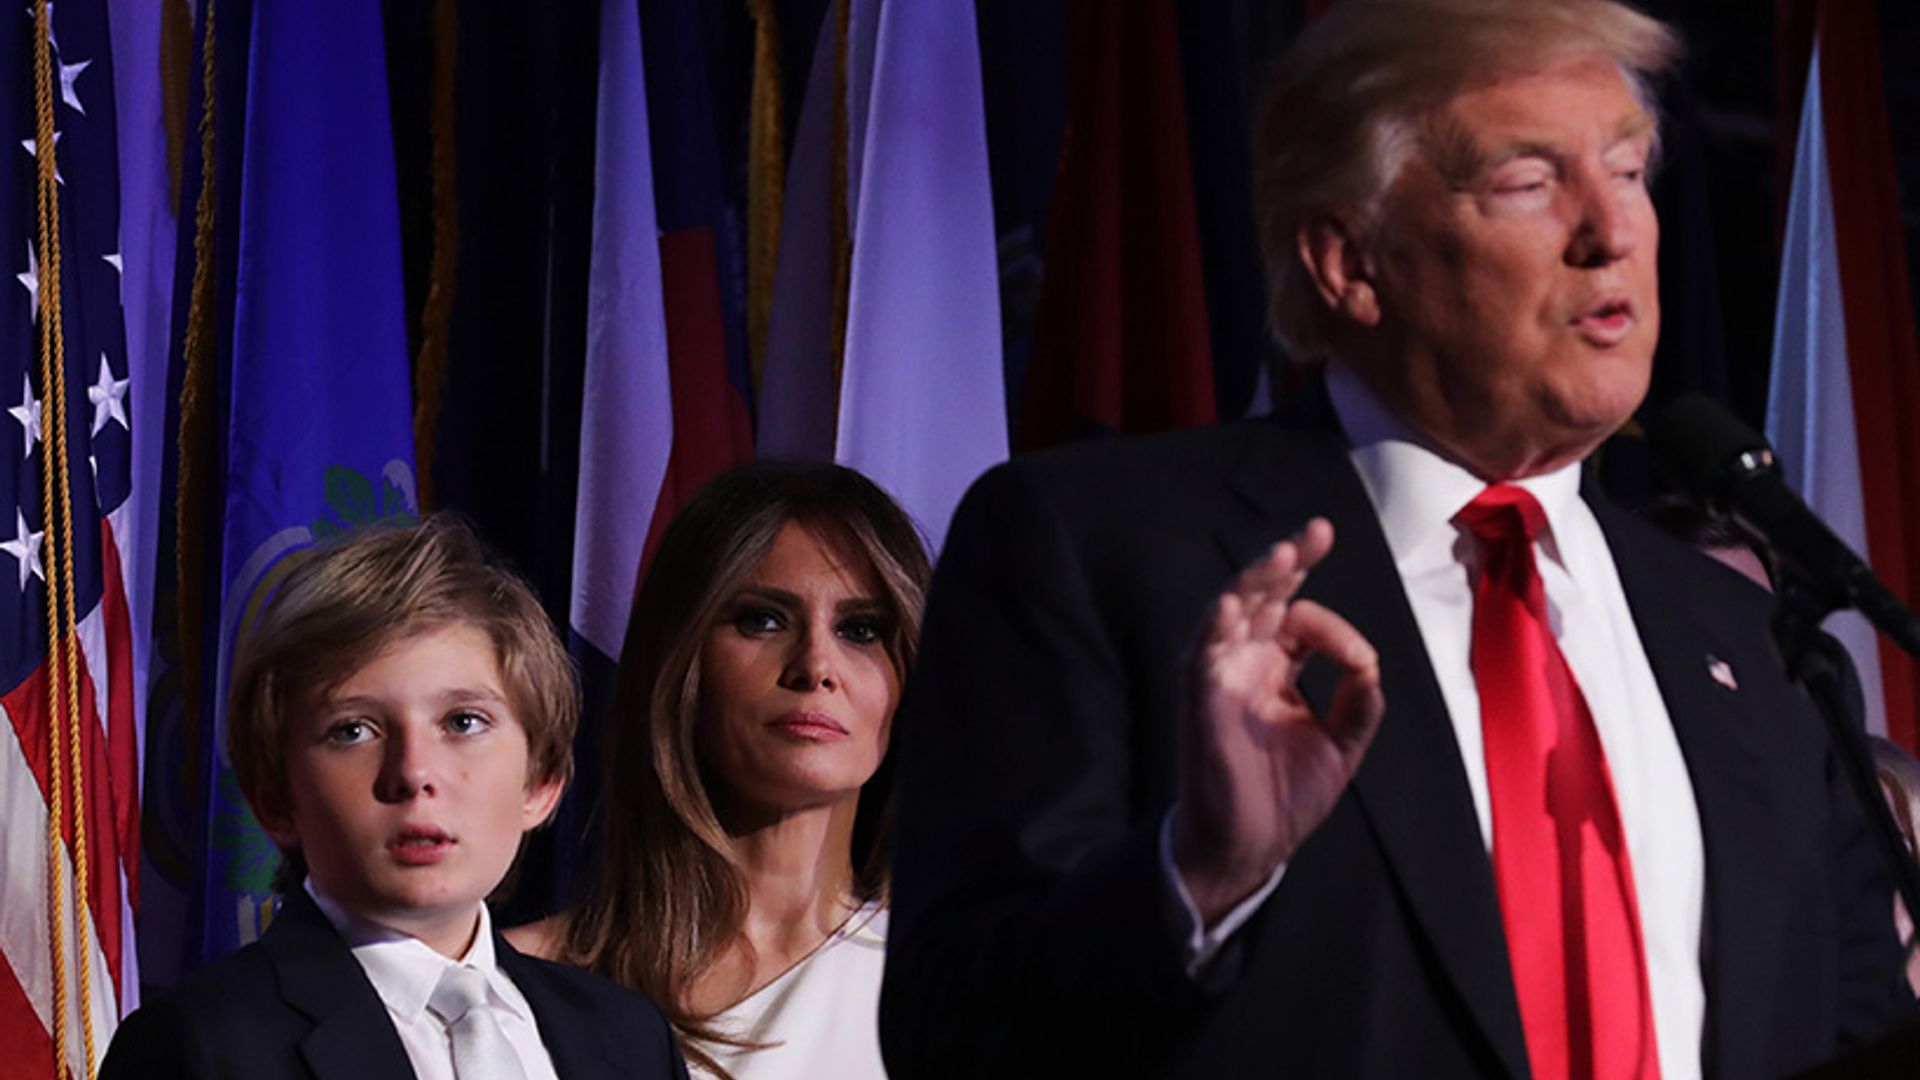 Melania Trump and son Barron postpone moving in to the White House – find out why